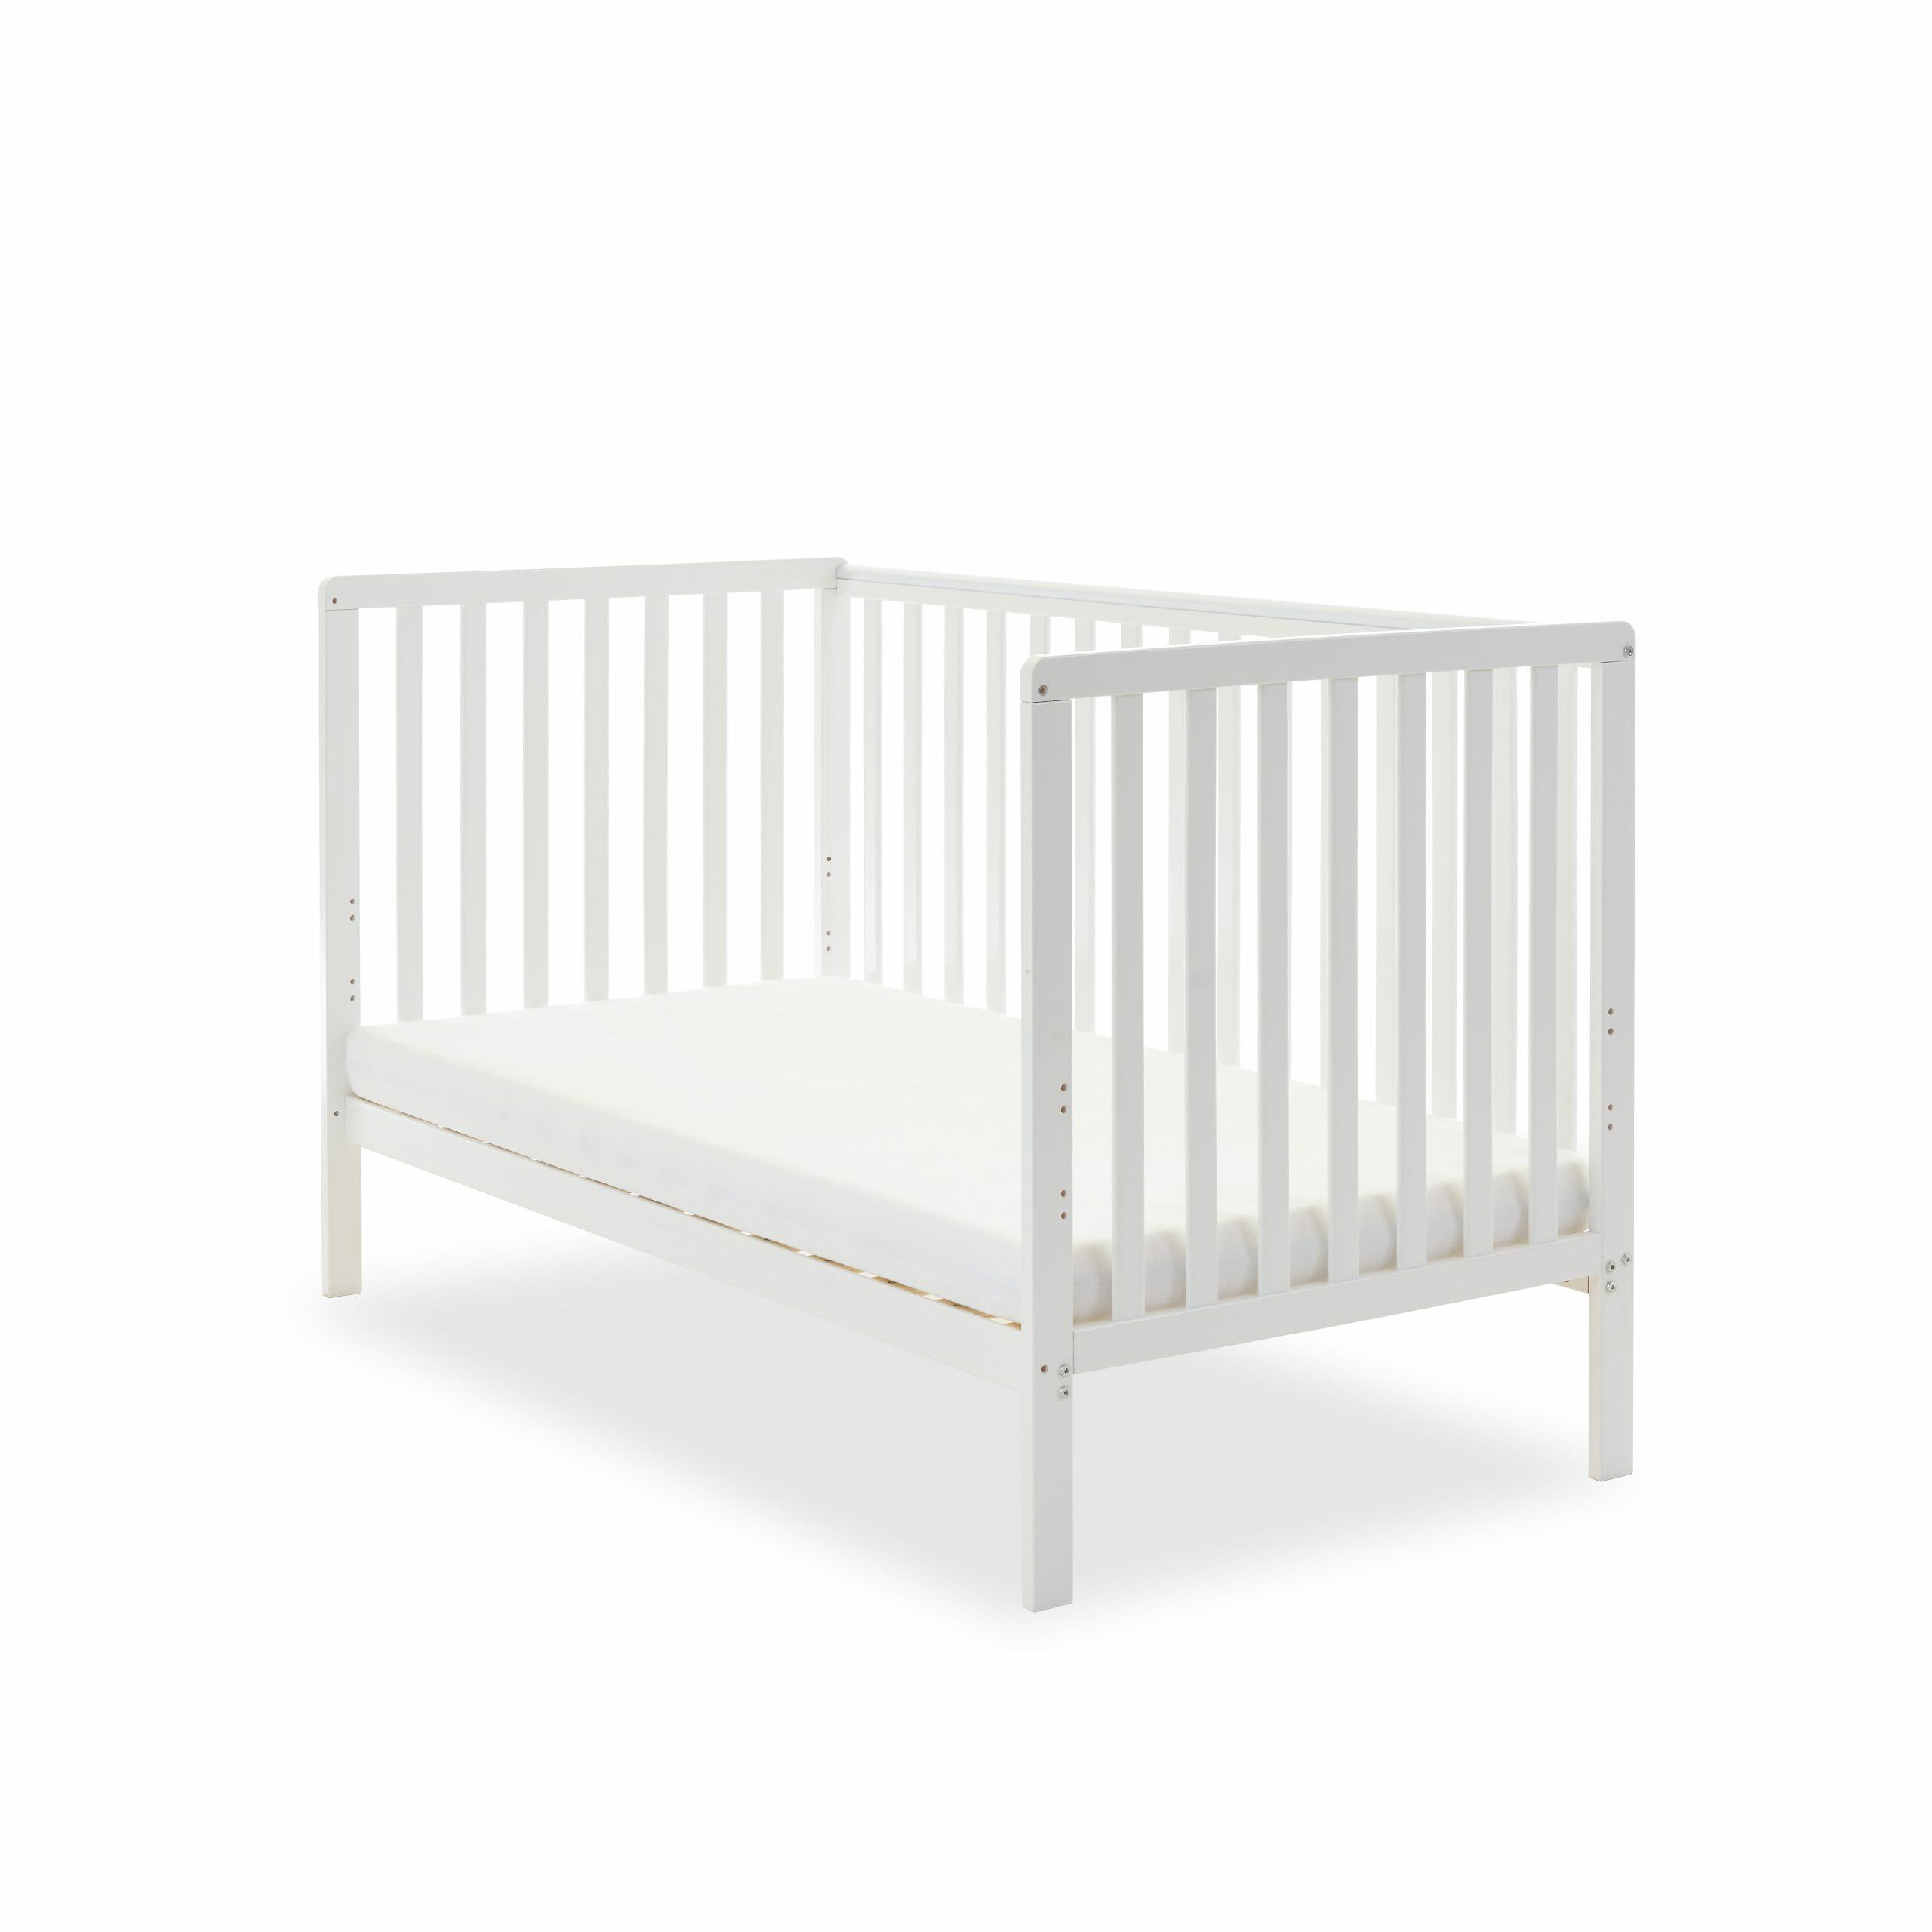 white cot bed under £200